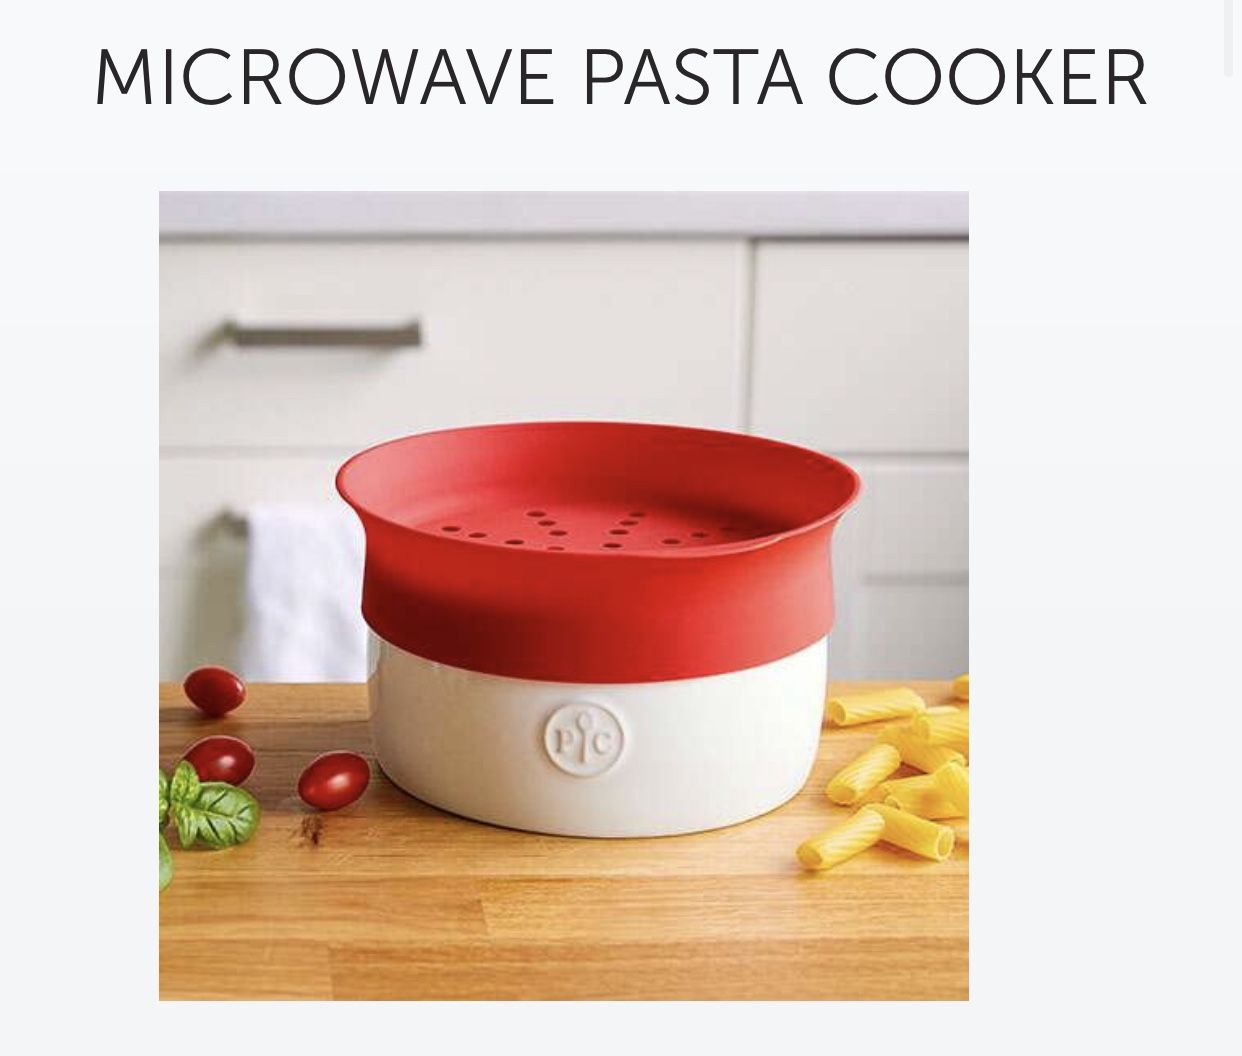 Pampered Chef - Microwave Pasta Cooker